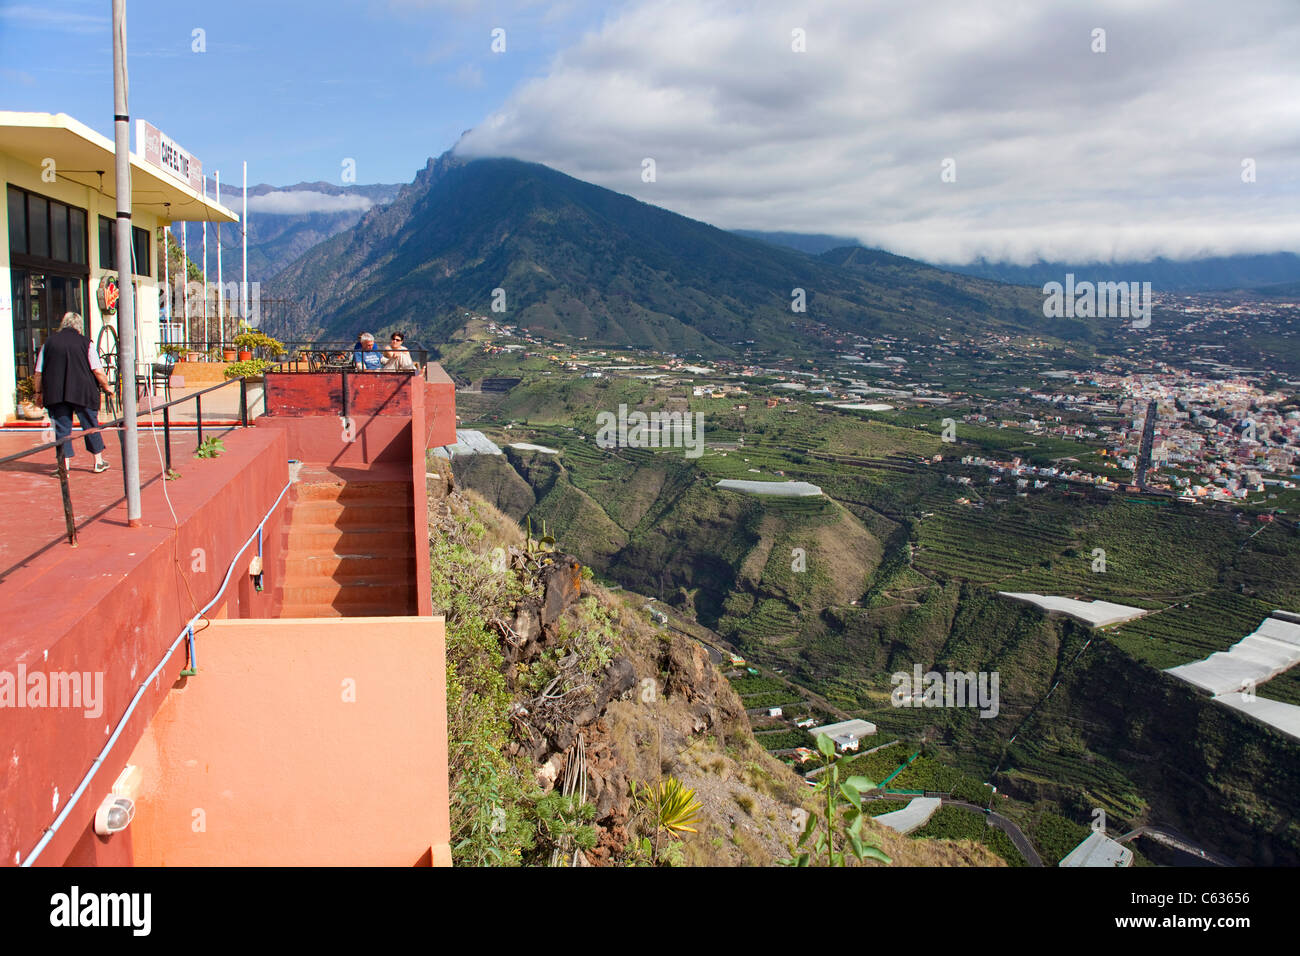 View from the terrace of the view point El Time over the valley Aridane and the town Los Llanos de Aridane, La Palma, Canary islands, Spain, Europe Stock Photo